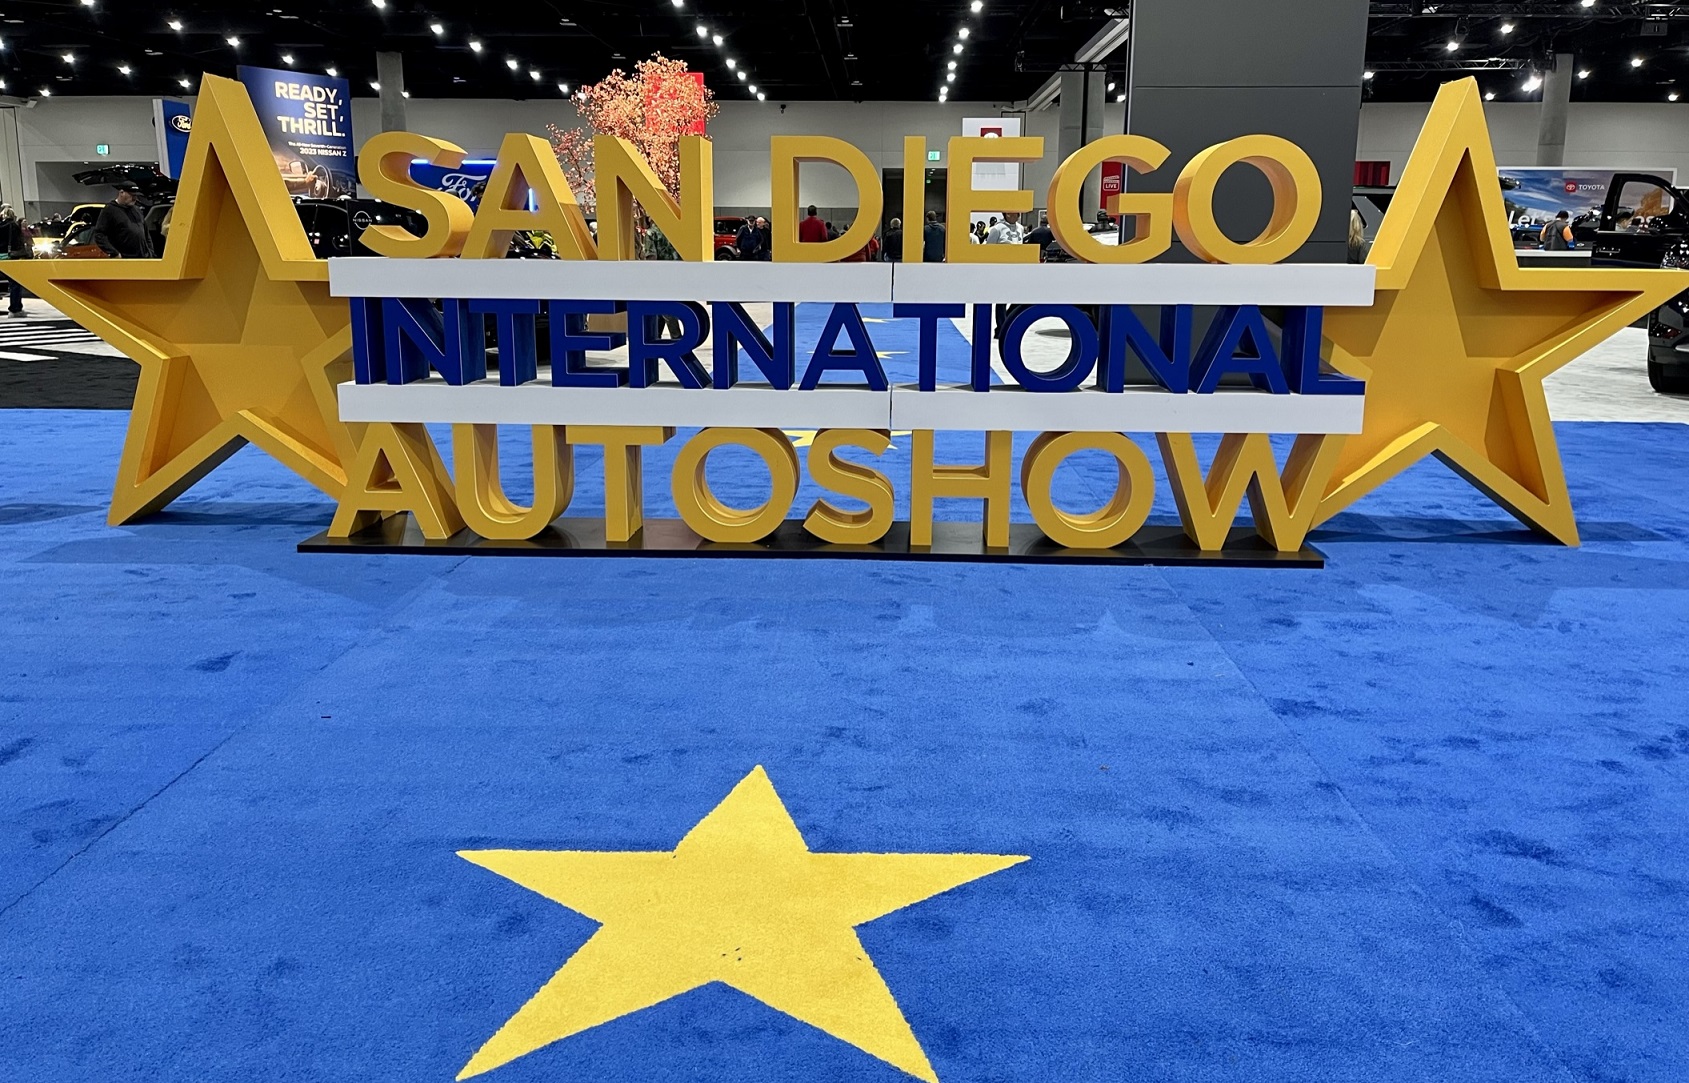 The auto show "selfie" icon on blue carpet with a big gold star